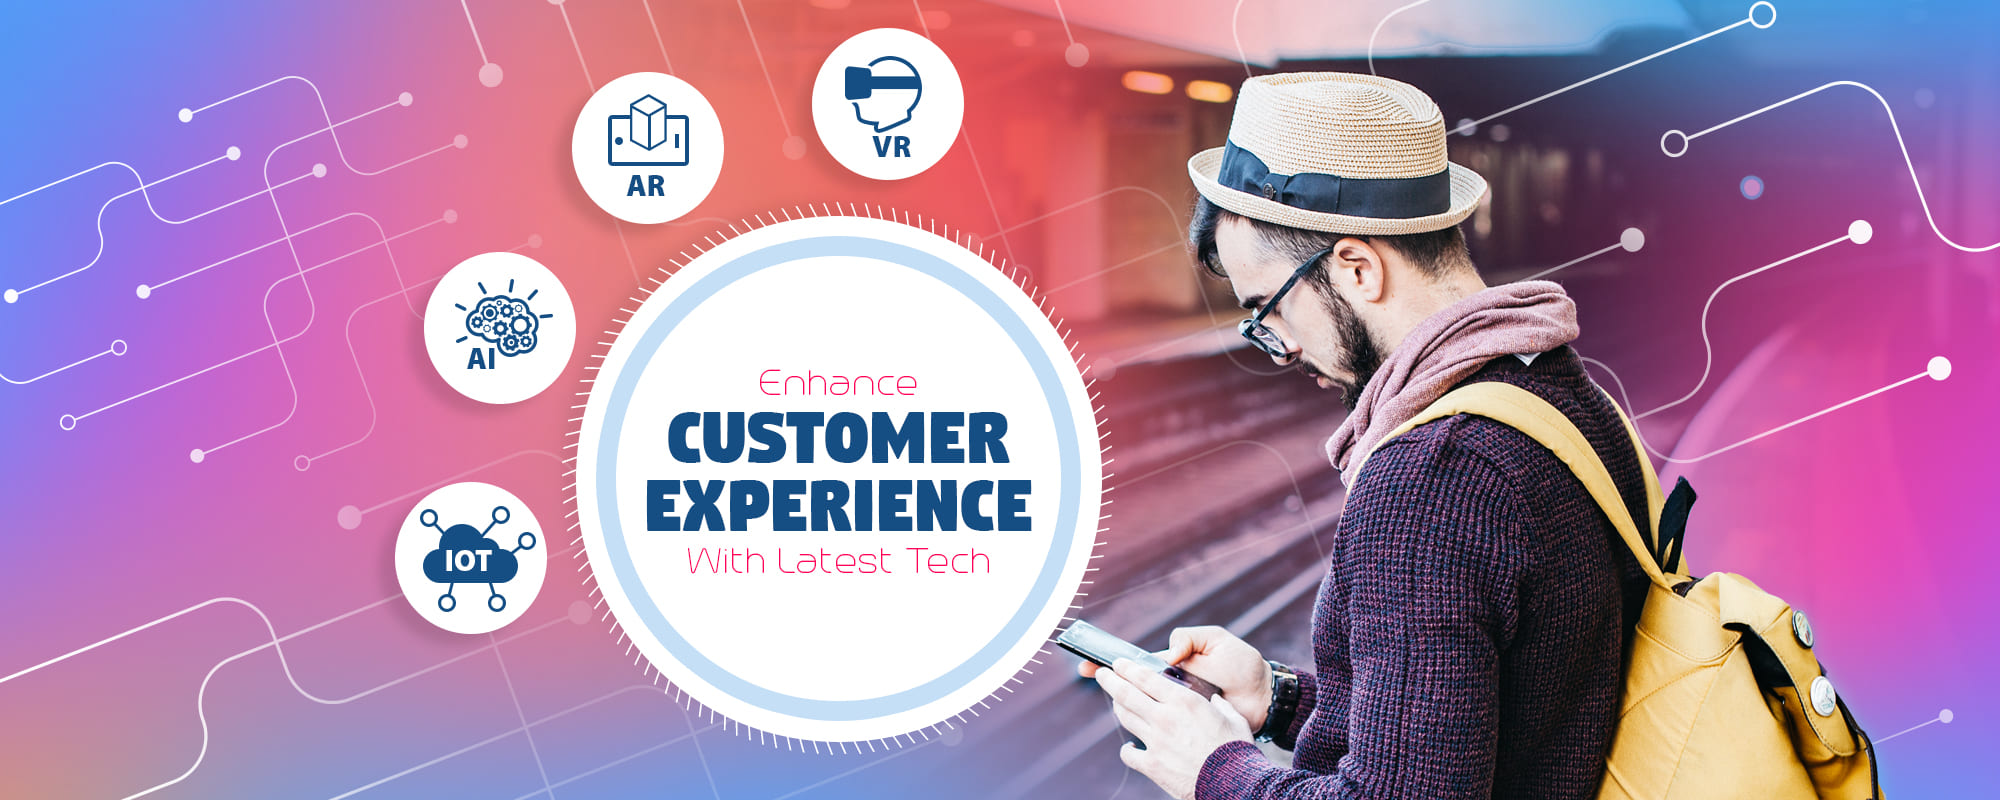 How Online Travel Startups Can Enhance Customer Experience with Latest Tech